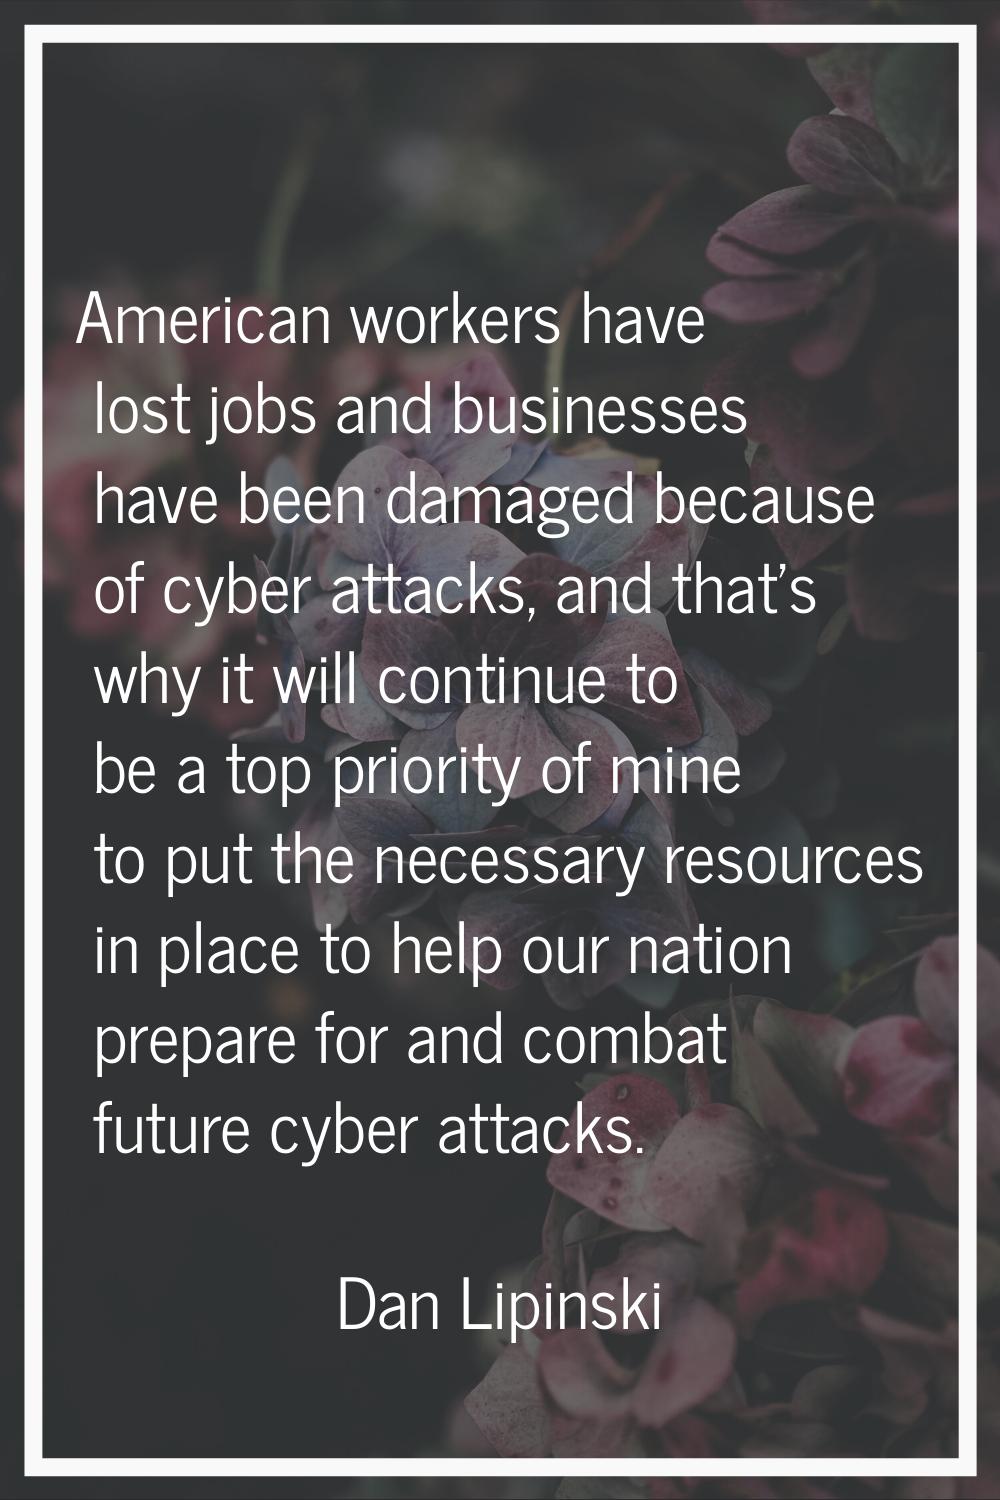 American workers have lost jobs and businesses have been damaged because of cyber attacks, and that